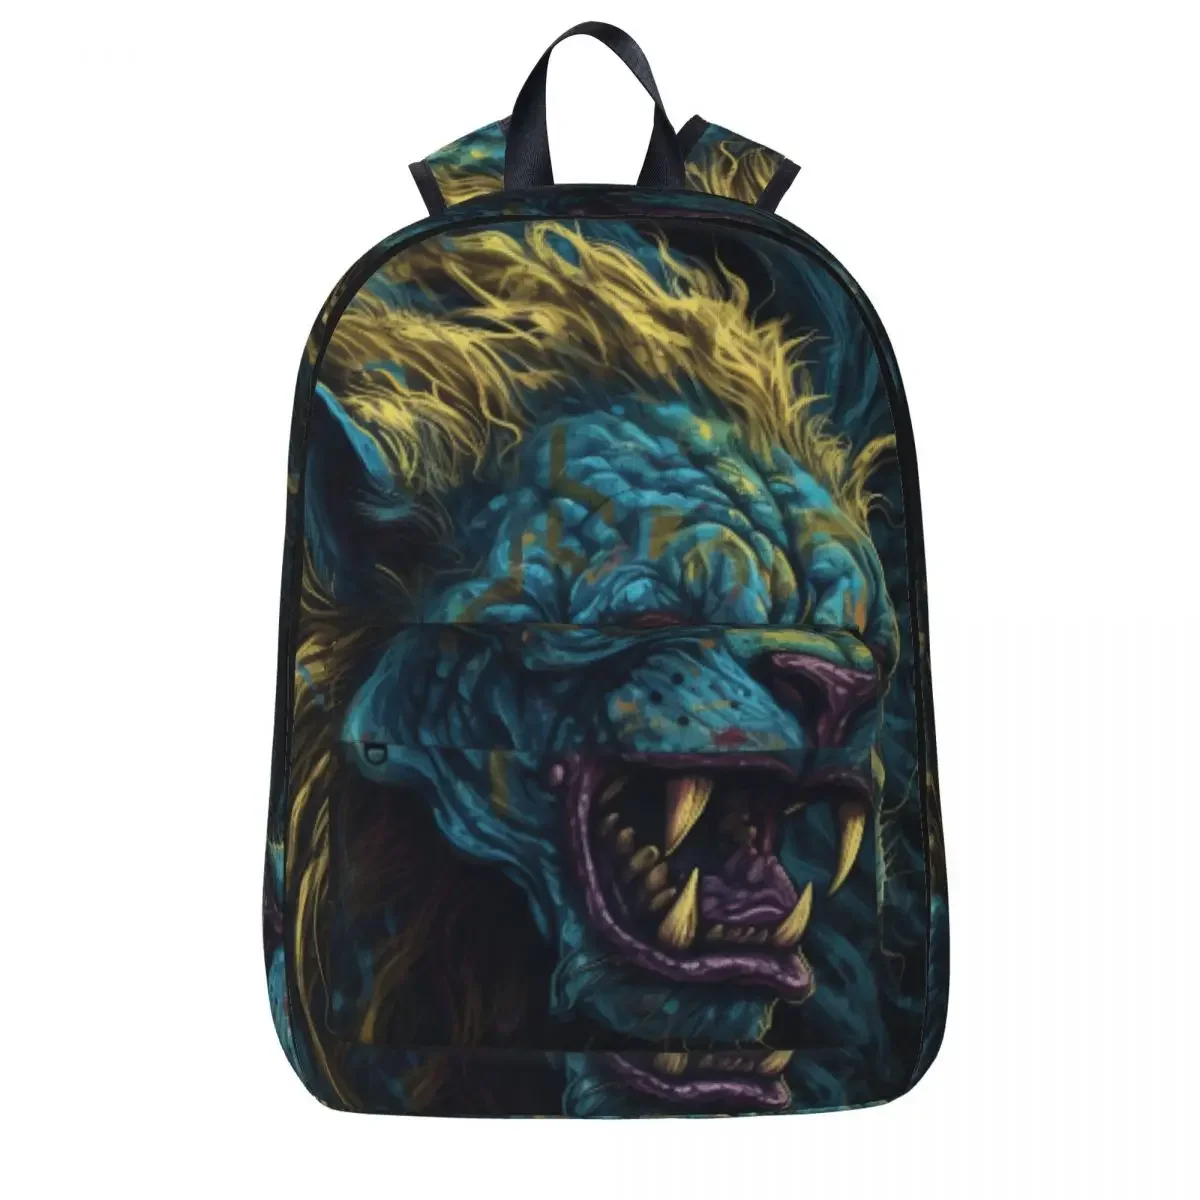 

Lion Backpack High Detail Zombie Portraits College Backpacks Unisex Style High School Bags Designer Large Rucksack